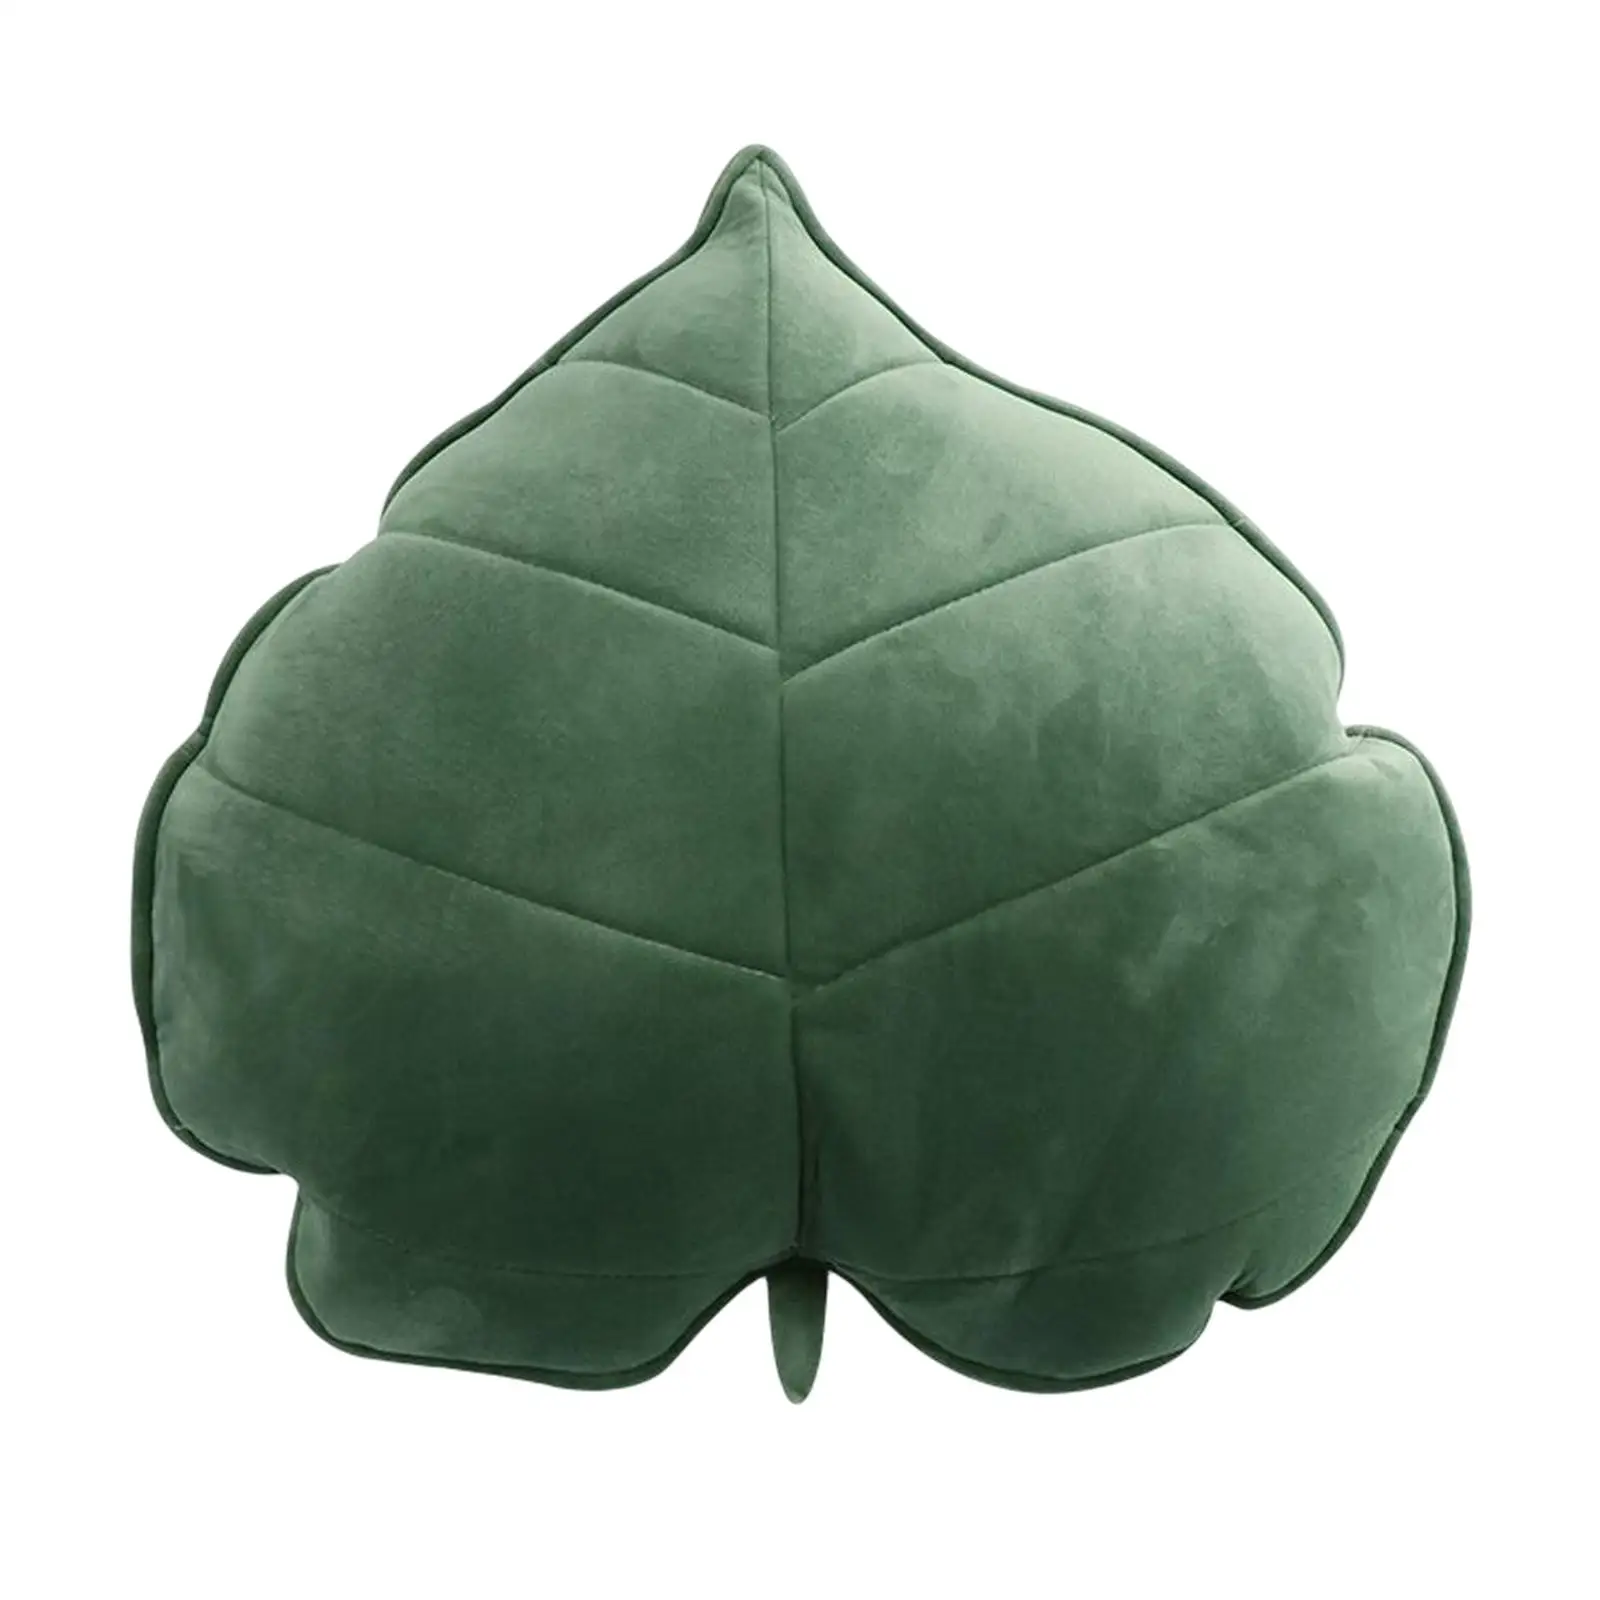 Cute Chair Cushion Ornament Soft and Comfortable Sleeping Accompany Toy Leaf Plush Hug Pillow for Spring Bedroom Sleeping Decor